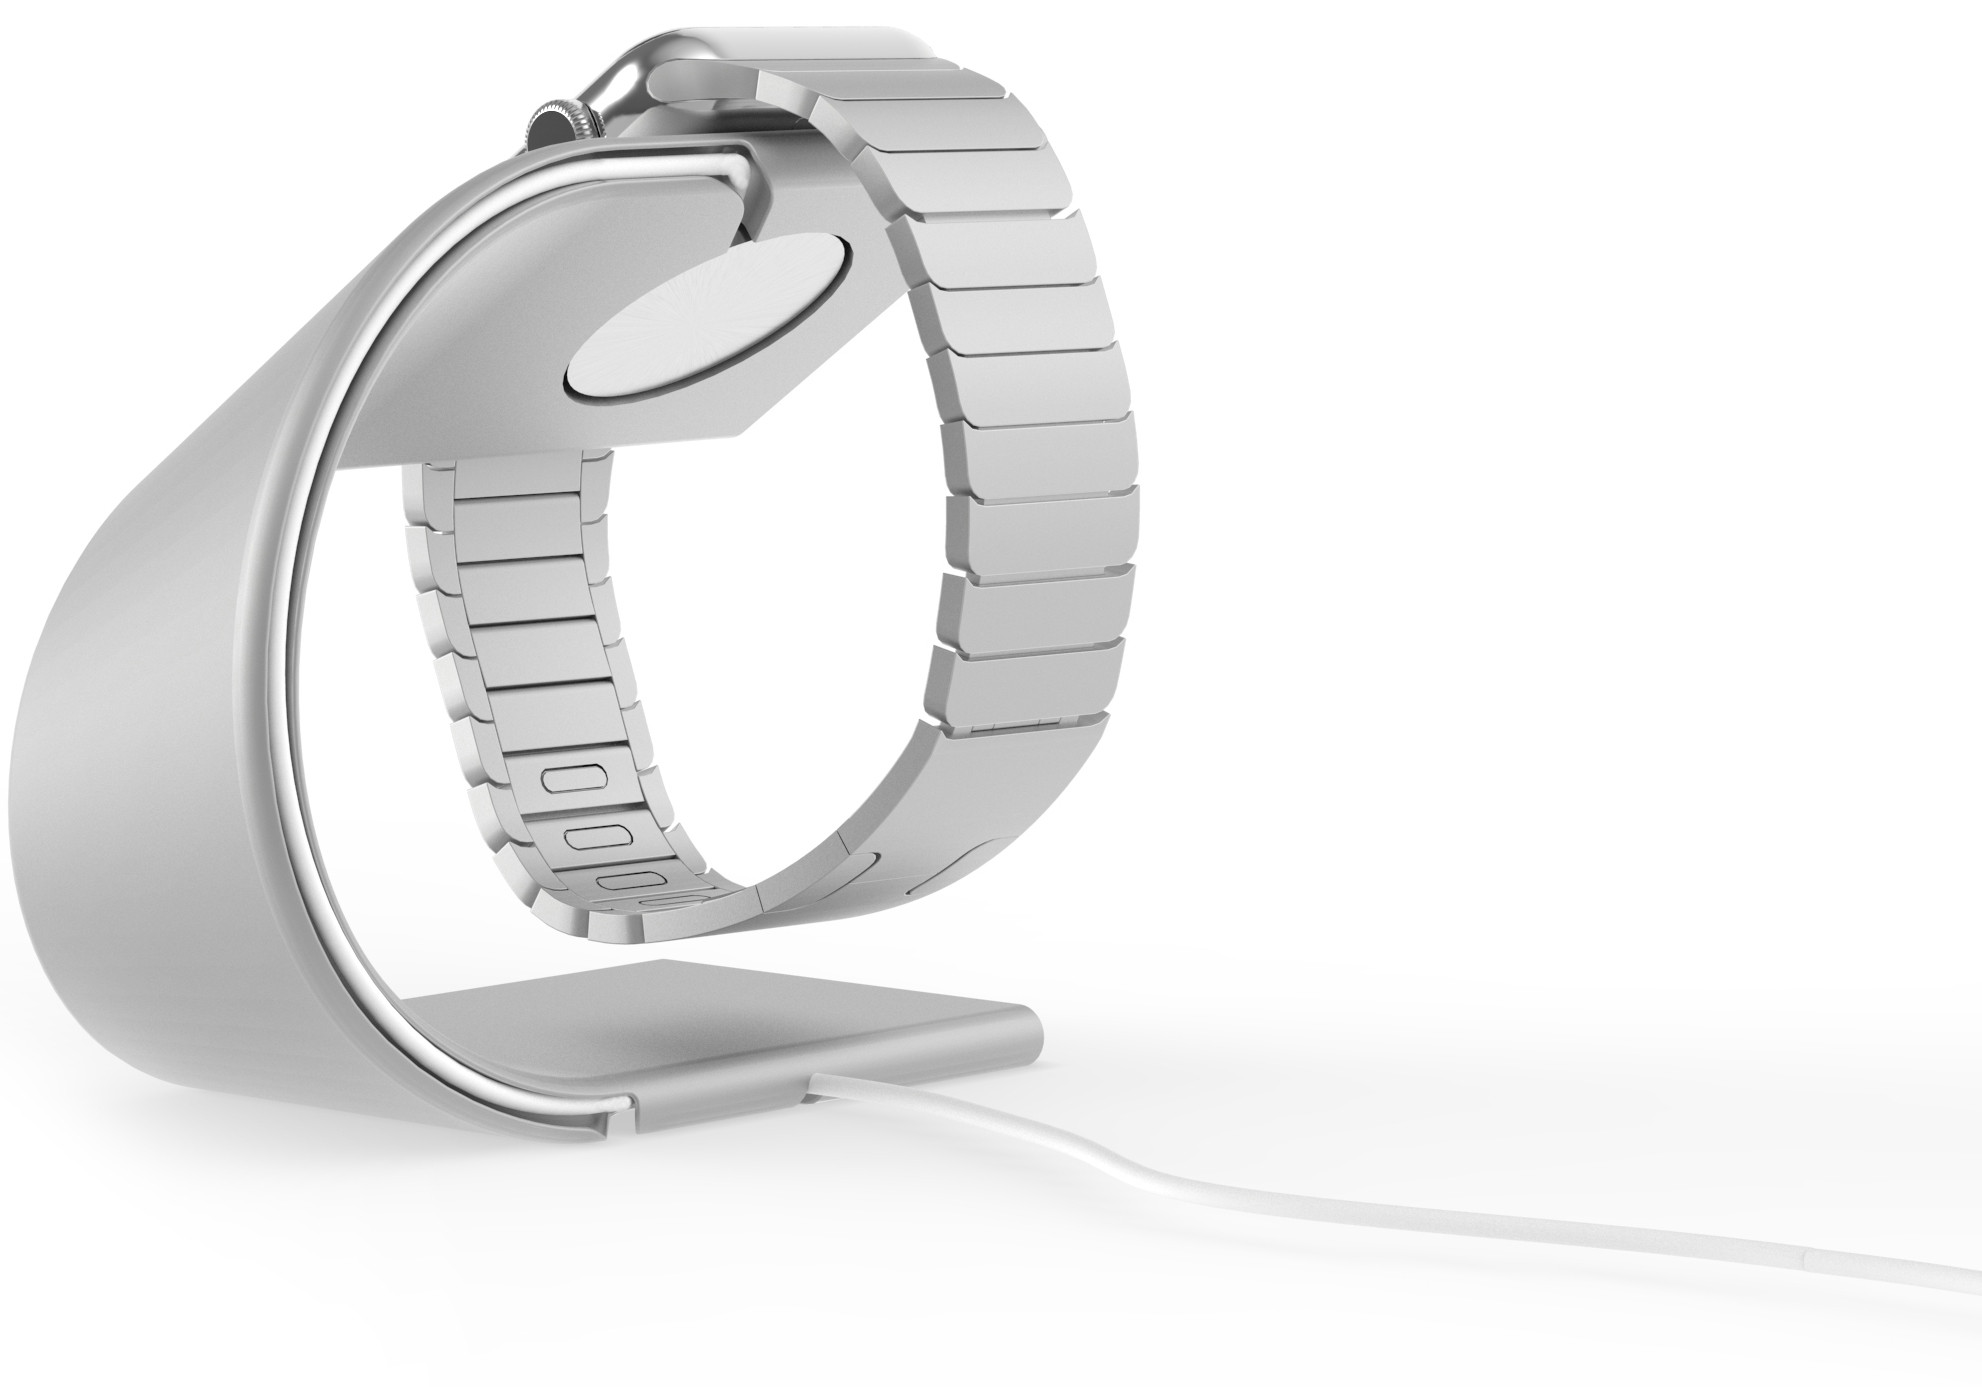 NOMAD AppleWatch Stand 02